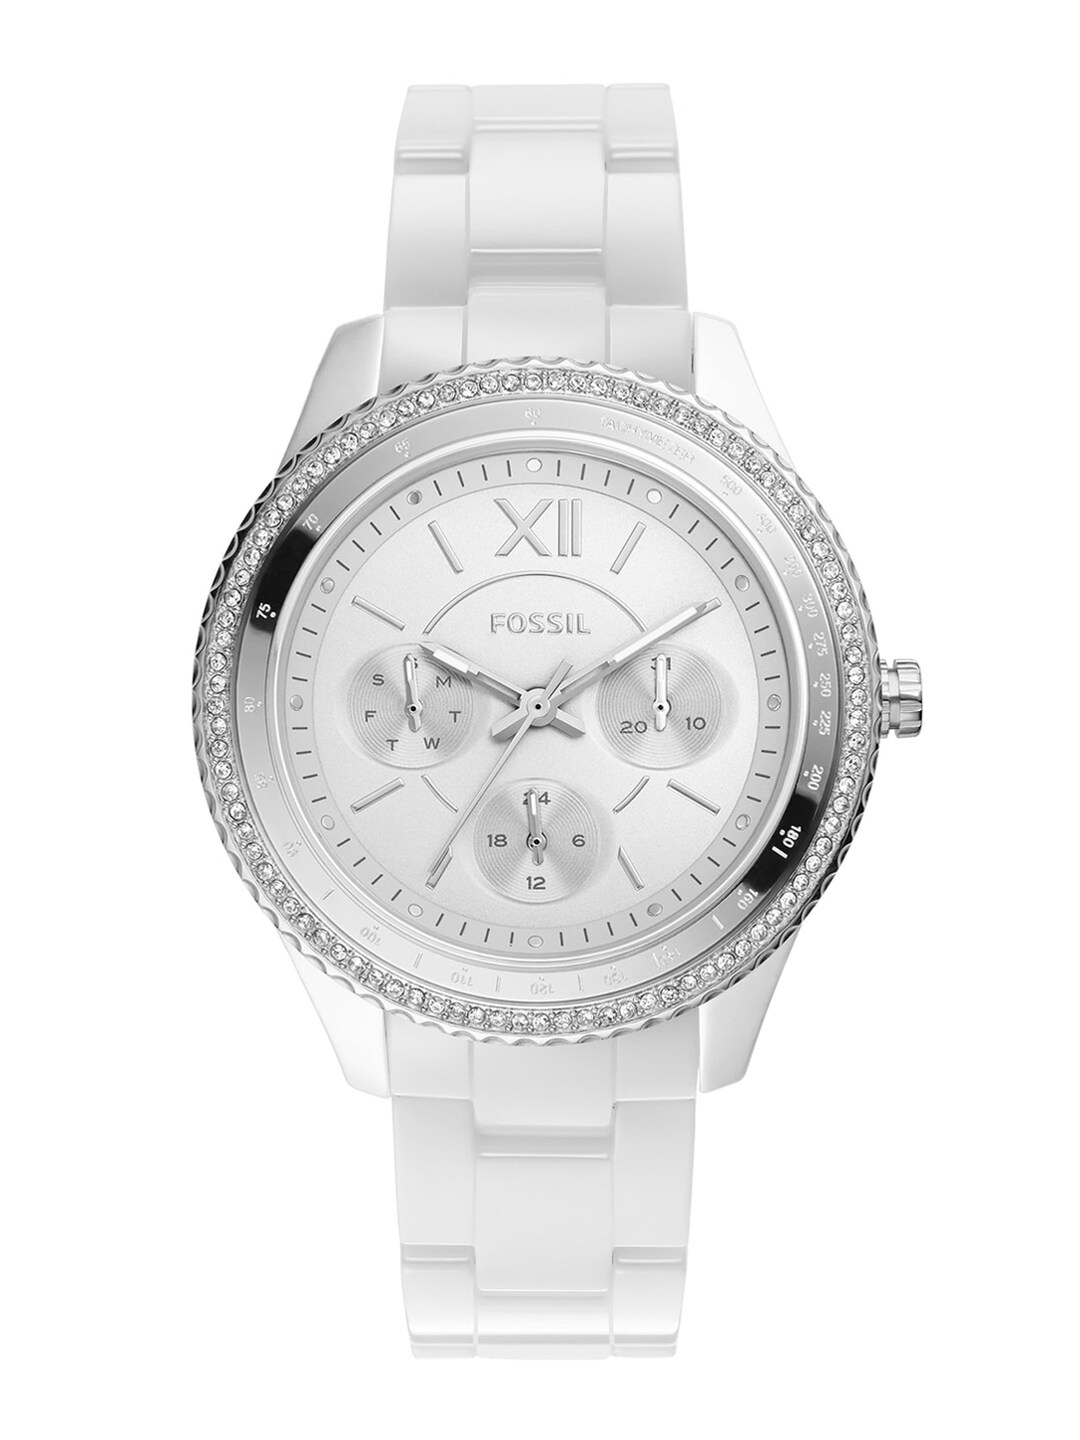 Fossil Women Silver-Toned Embellished Dial& White Ceramic Analogue Watch CE1113 Price in India